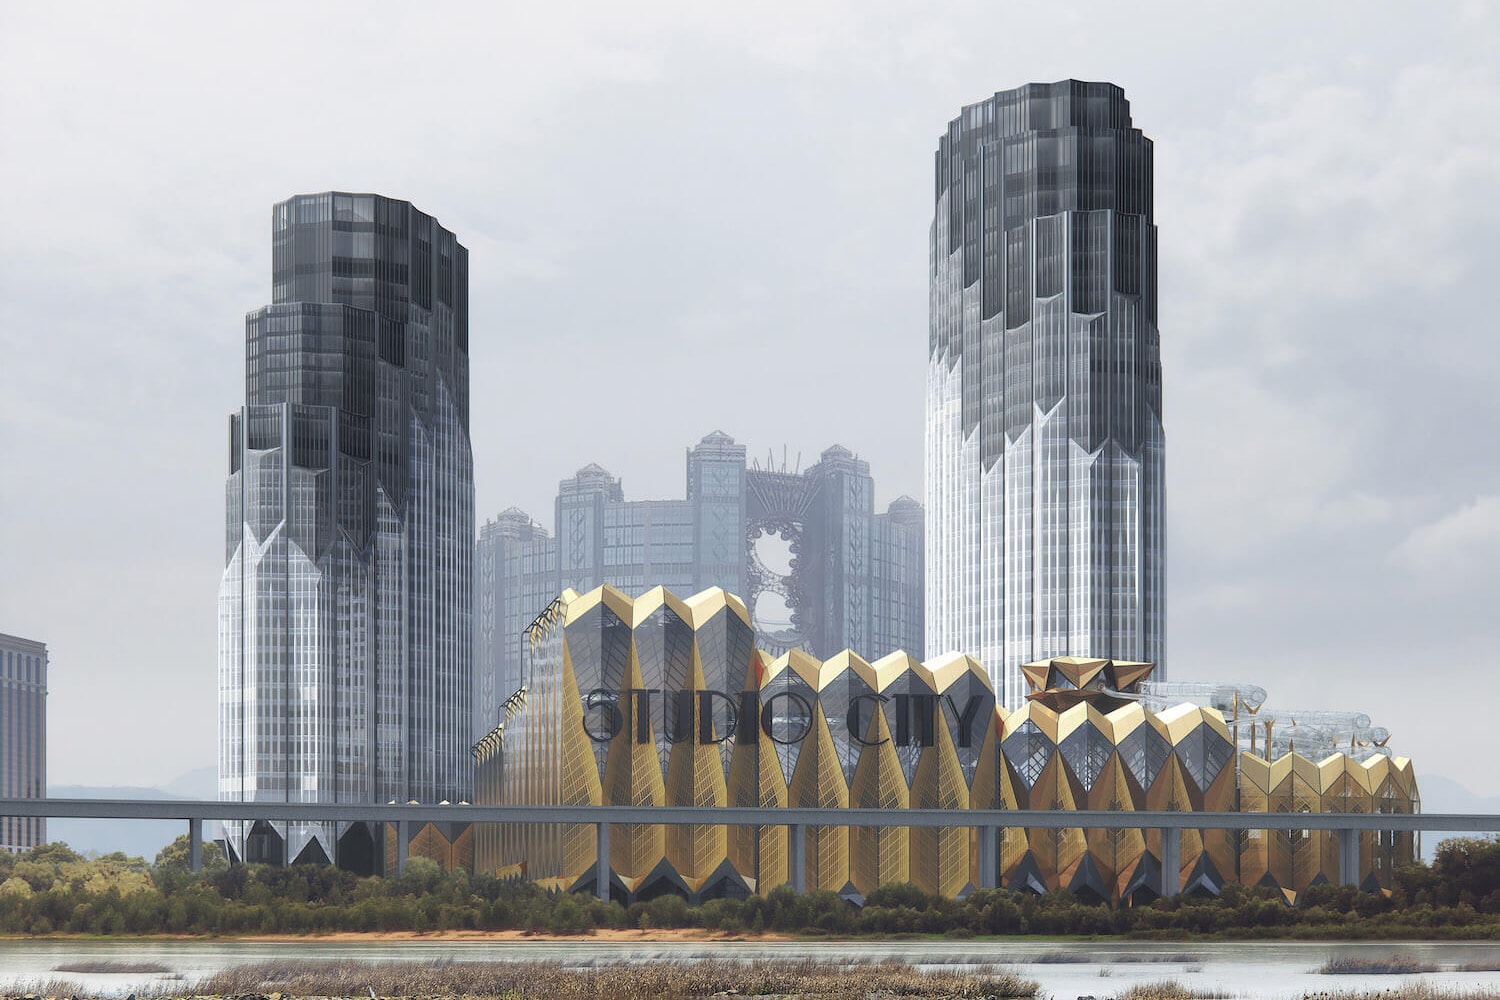 Zaha Hadid Architects Begins Construction on Hollywood-Inspired Studio City Expansion in Macau phase 2 vertical glass fins basalt rock  cotai strip 900 room hotel cinema water park retail space wetland timber look 